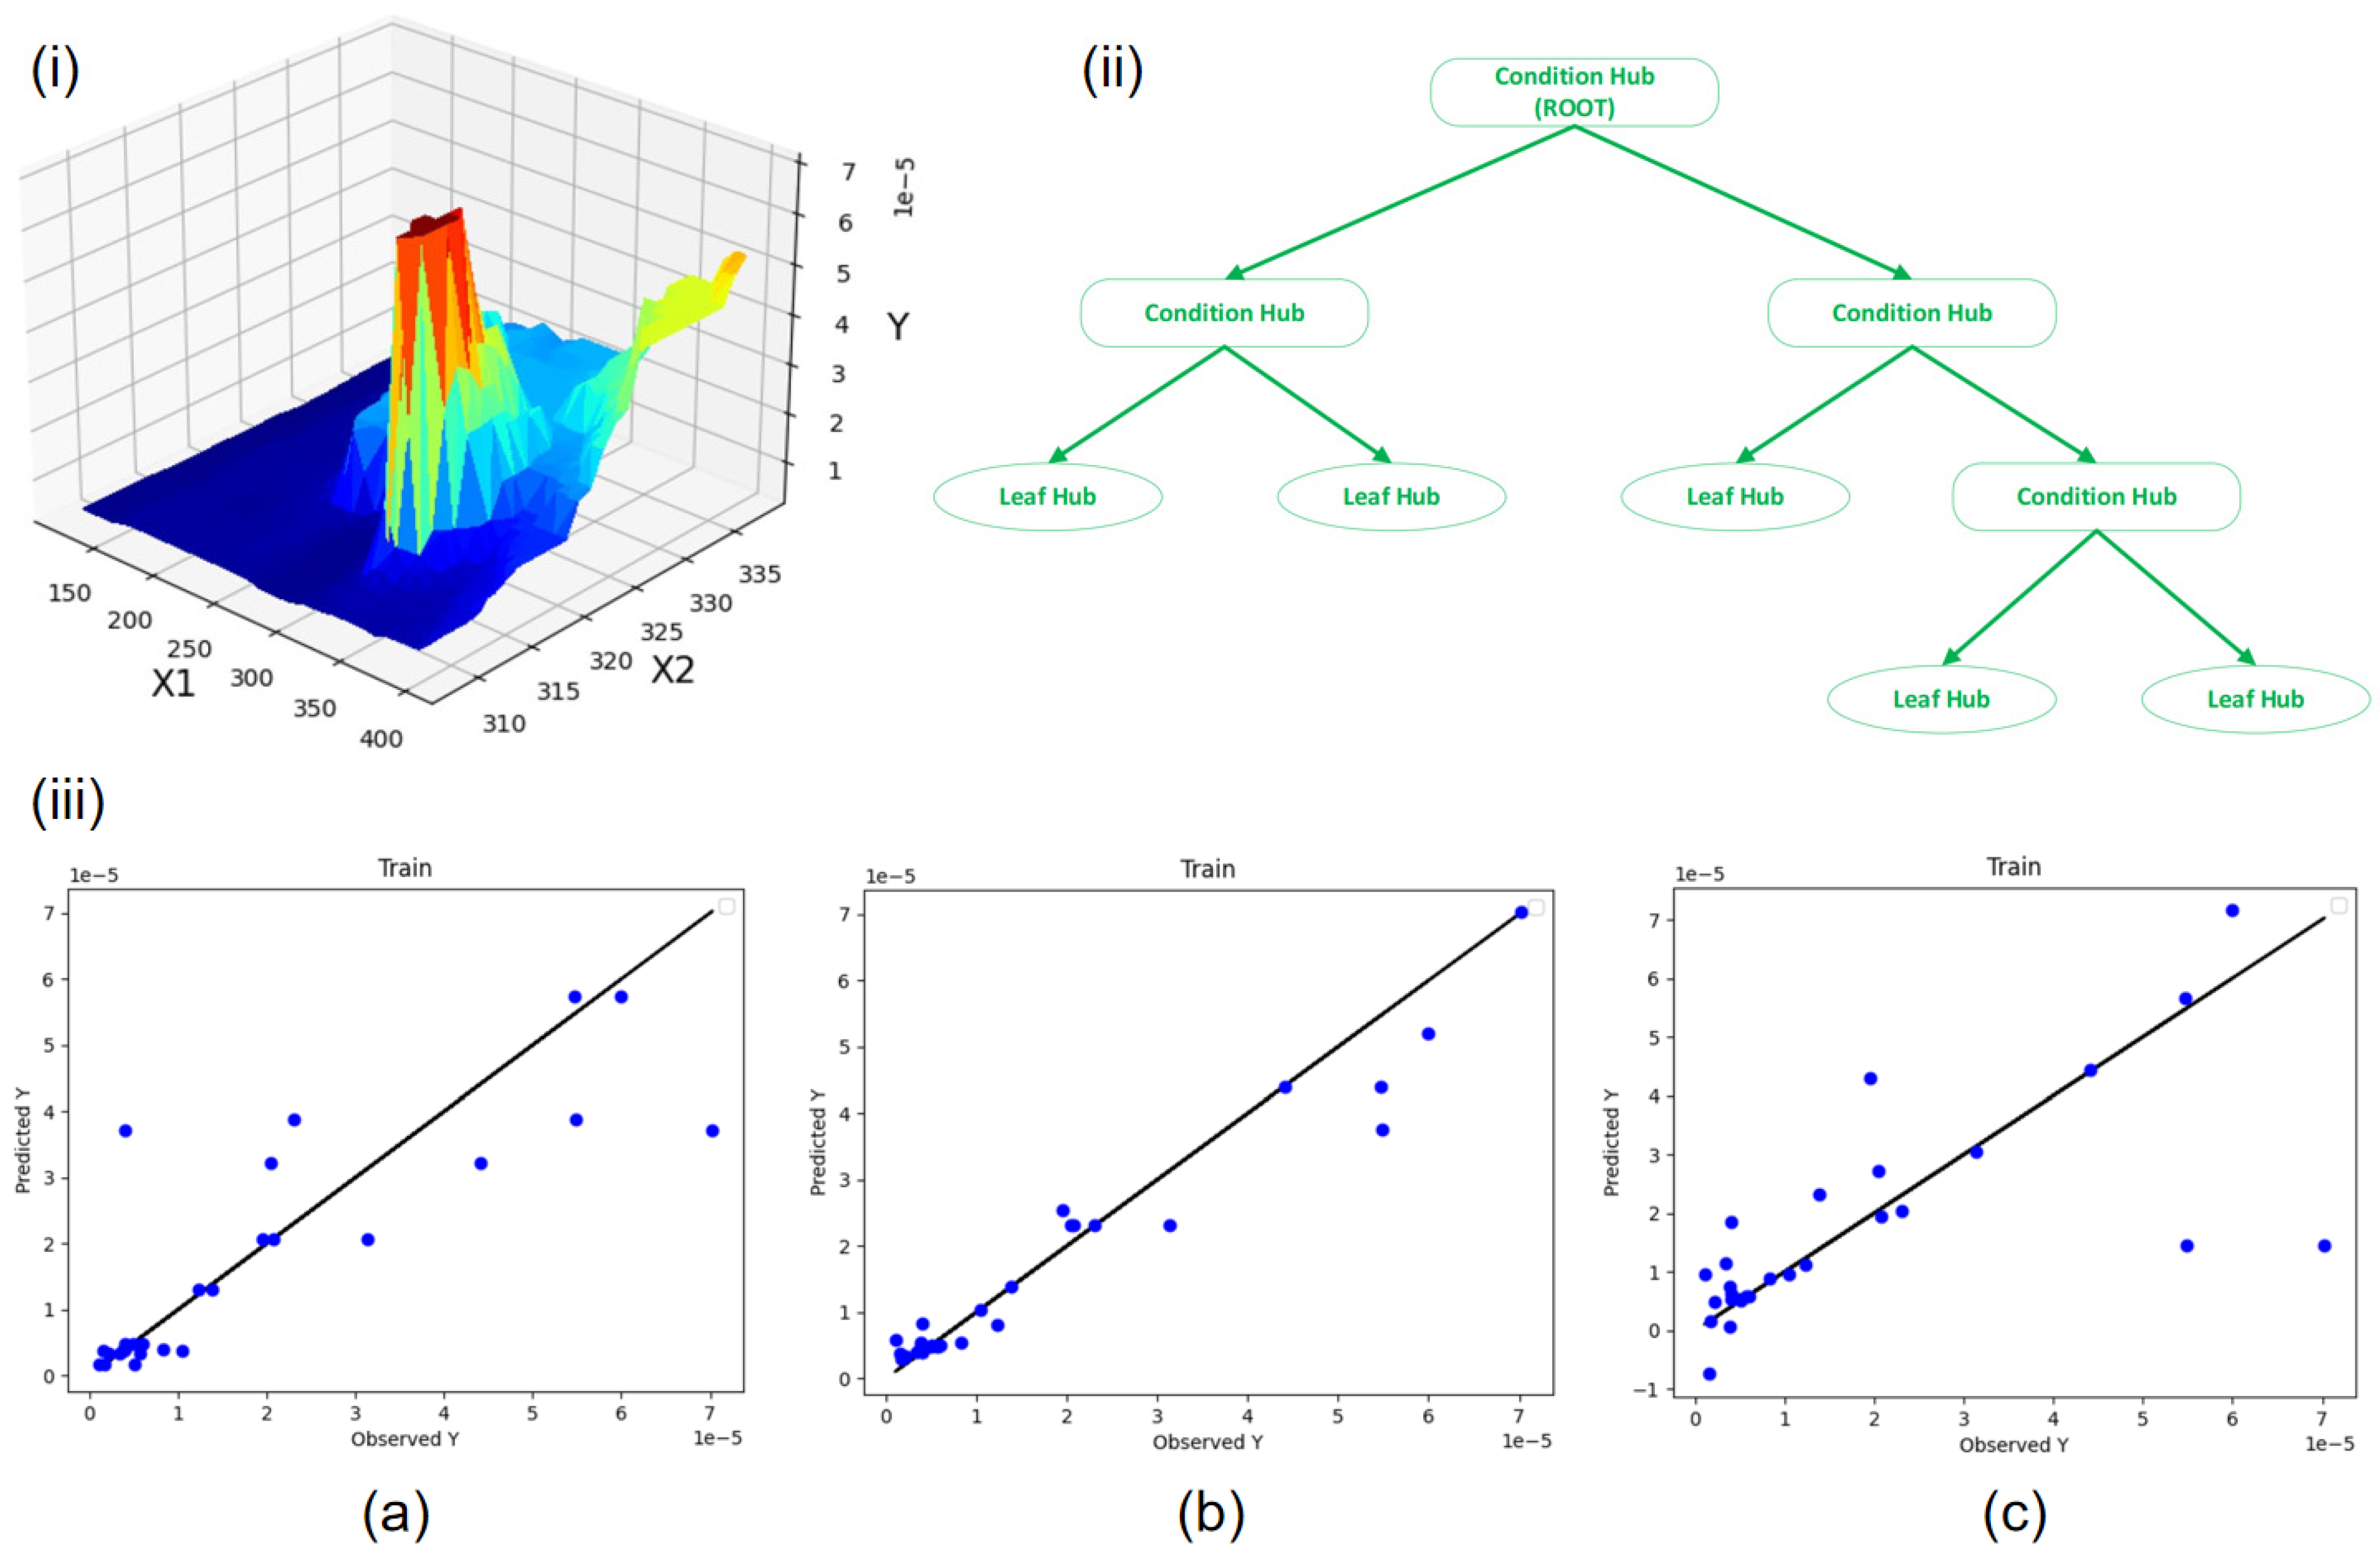 Computational intelligence modeling of hyoscine drug solubility and solvent  density in supercritical processing: gradient boosting, extra trees, and  random forest models